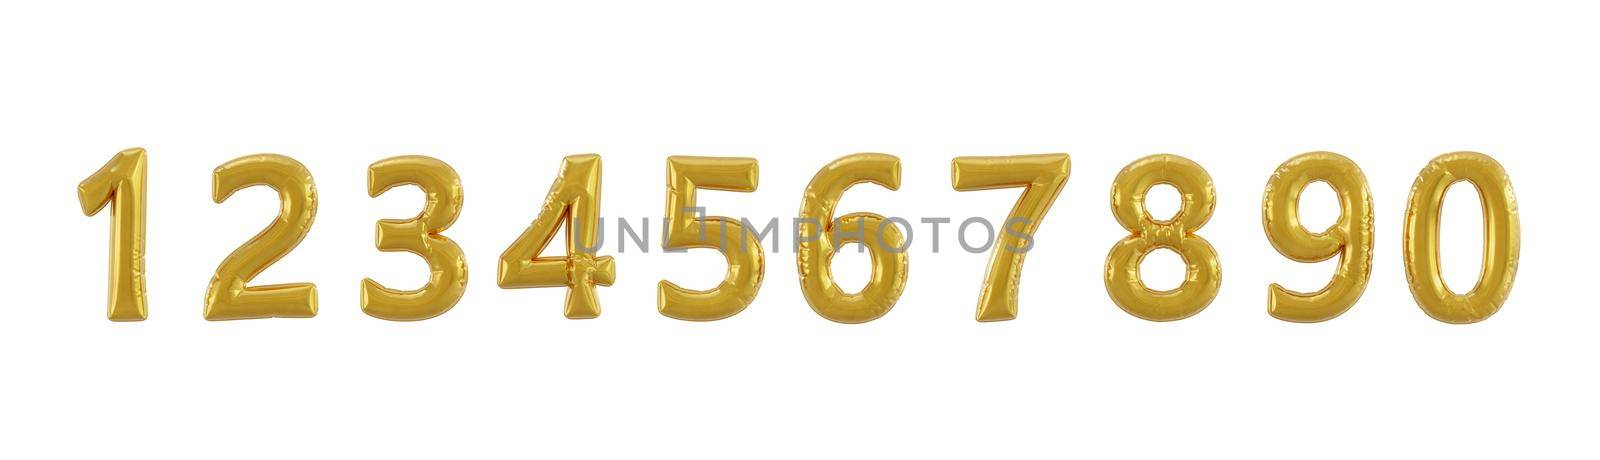 golden balloon numbers isolated on white background for easy cutout. lettering font. 3d render